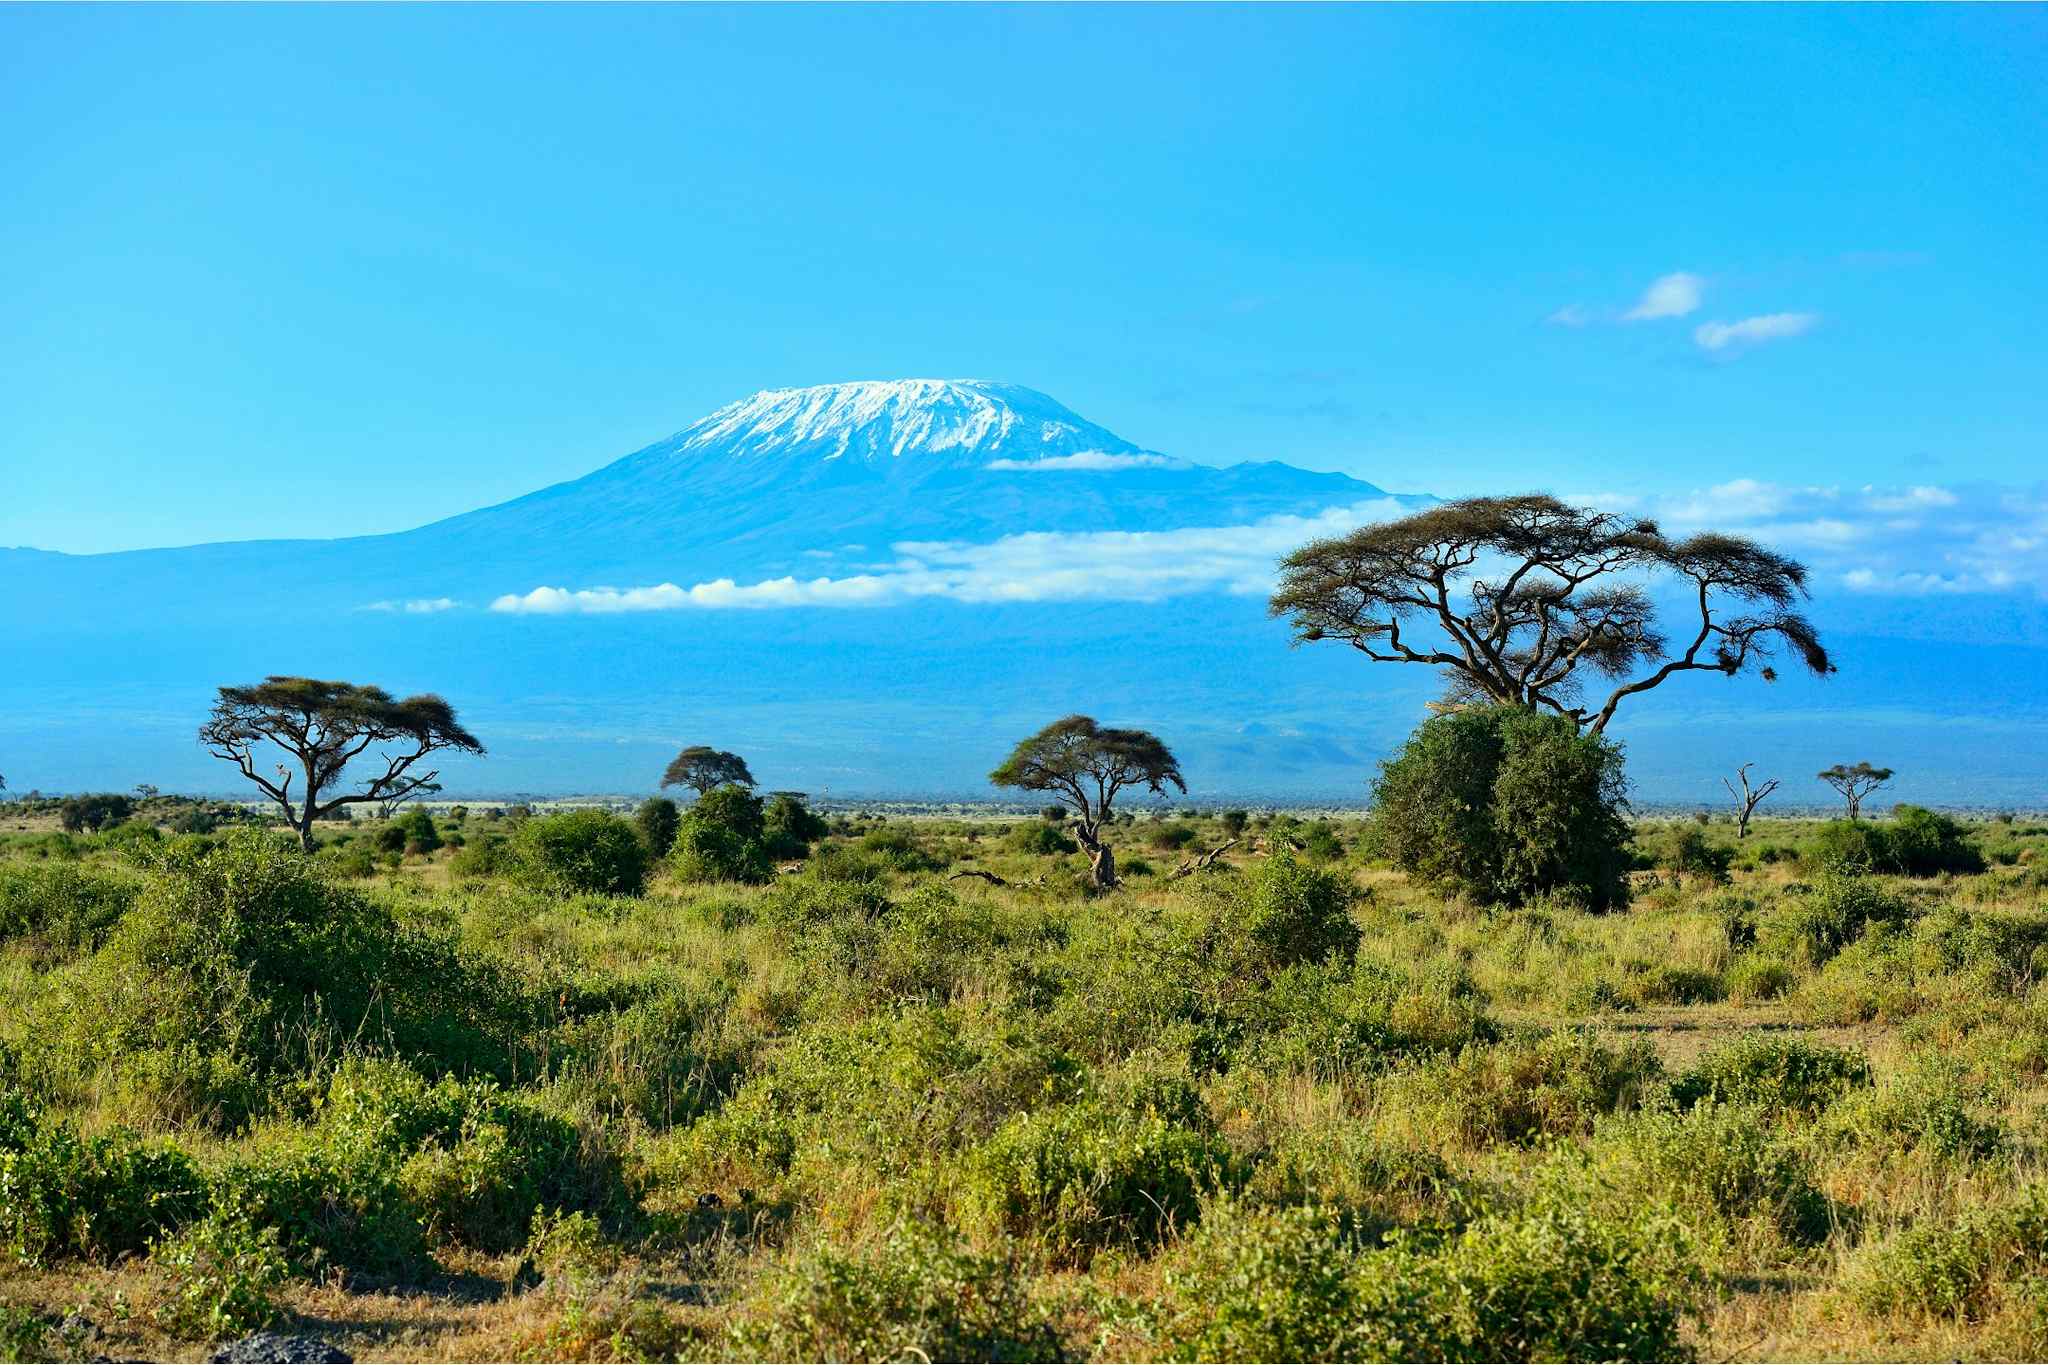 Green plains with acacia trees in Tanzania, with Mount Kilimanjaro in the background